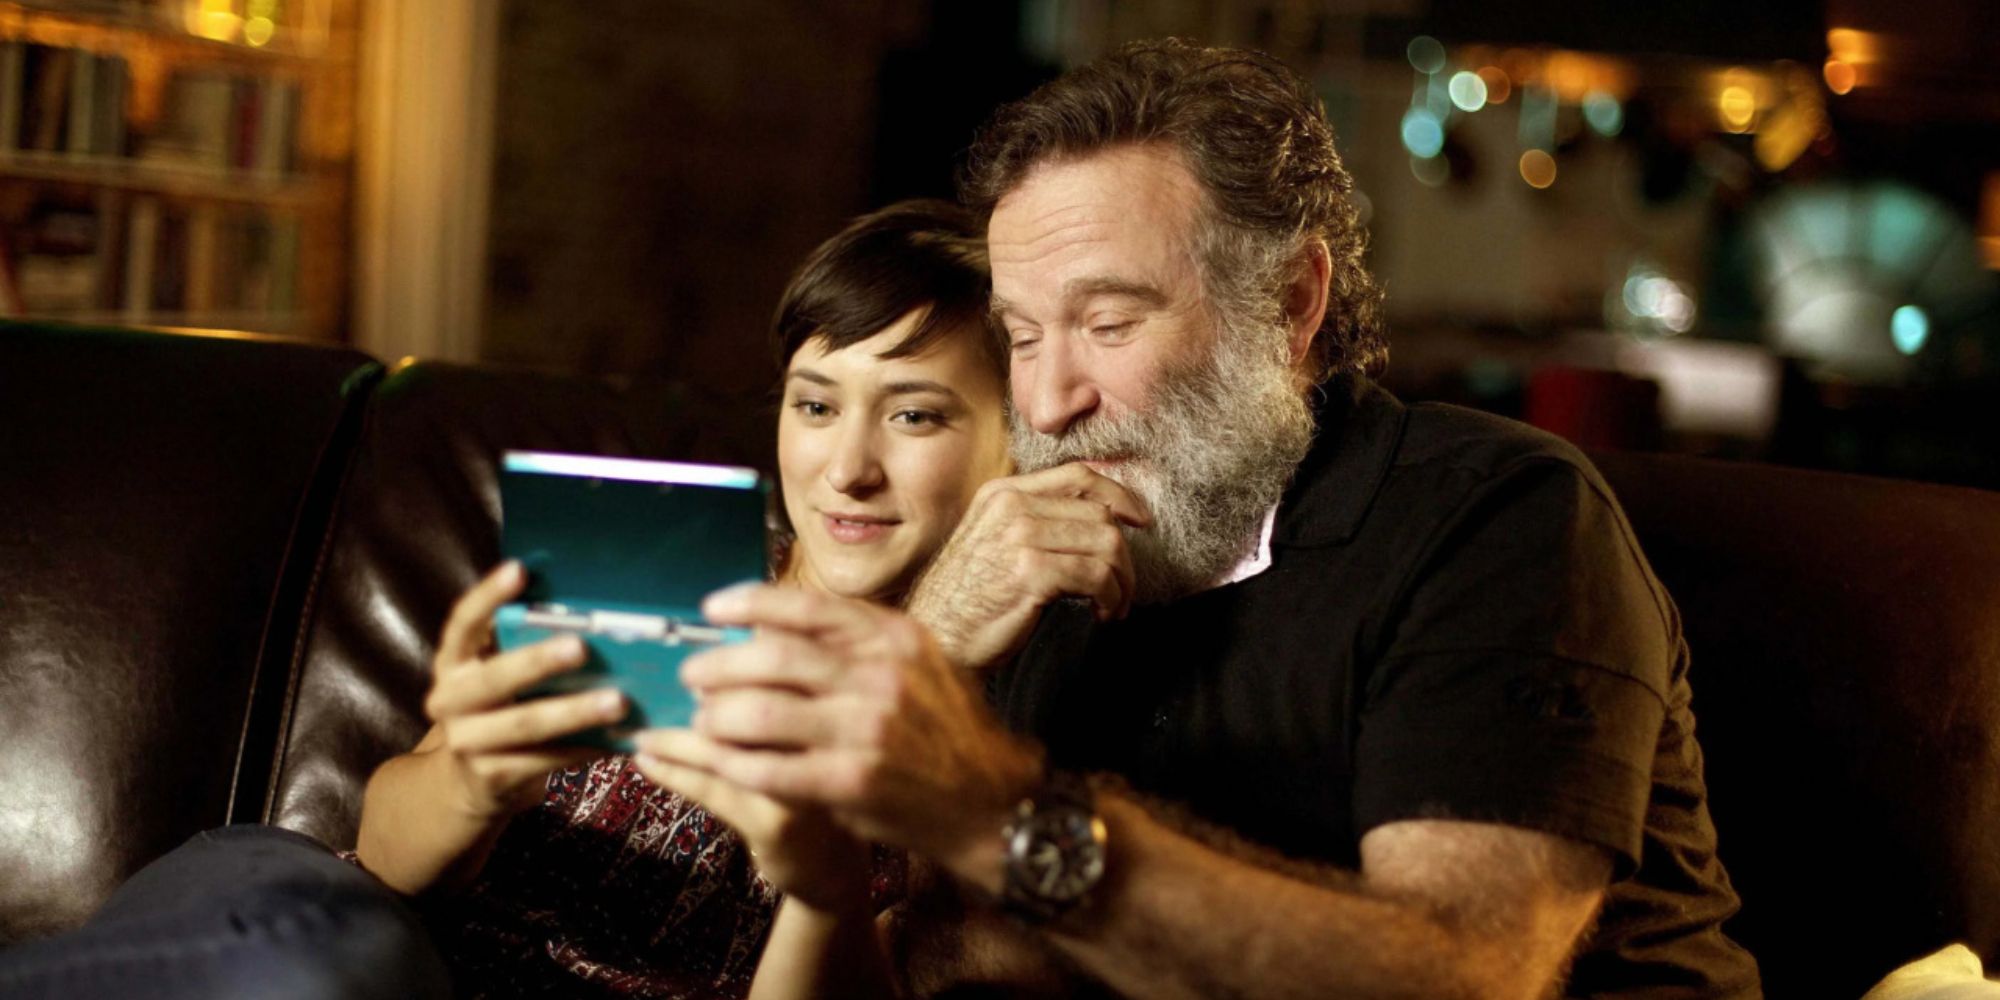 Robin Williams and Zelda Williams playing a 3DS